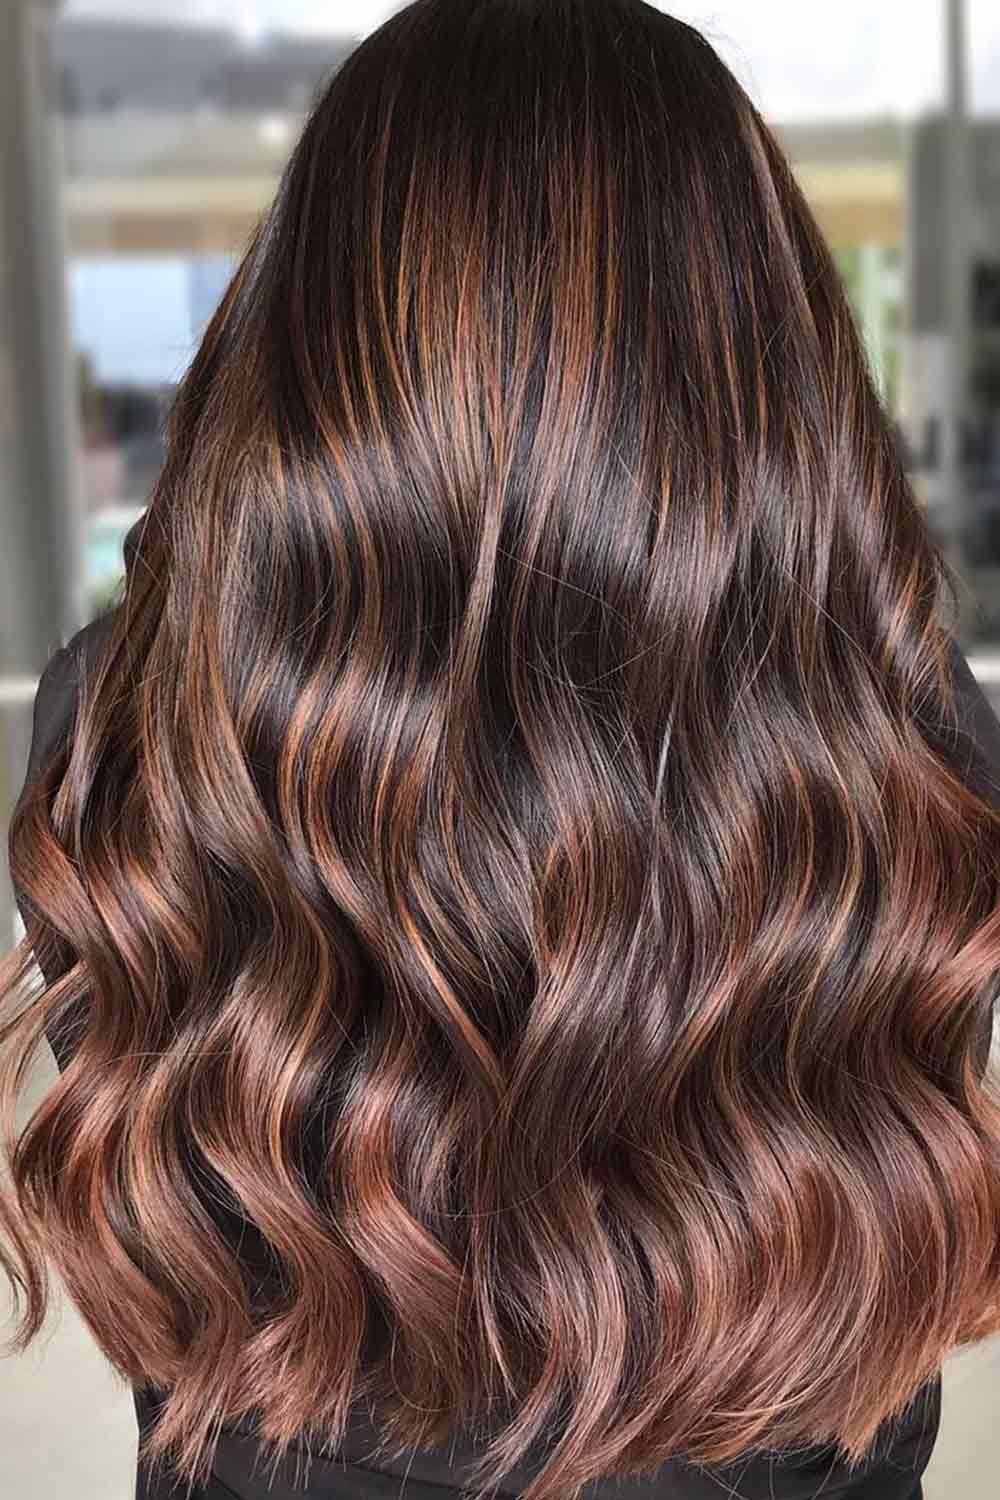 40 shades of brown hair color chart to suit any complexion